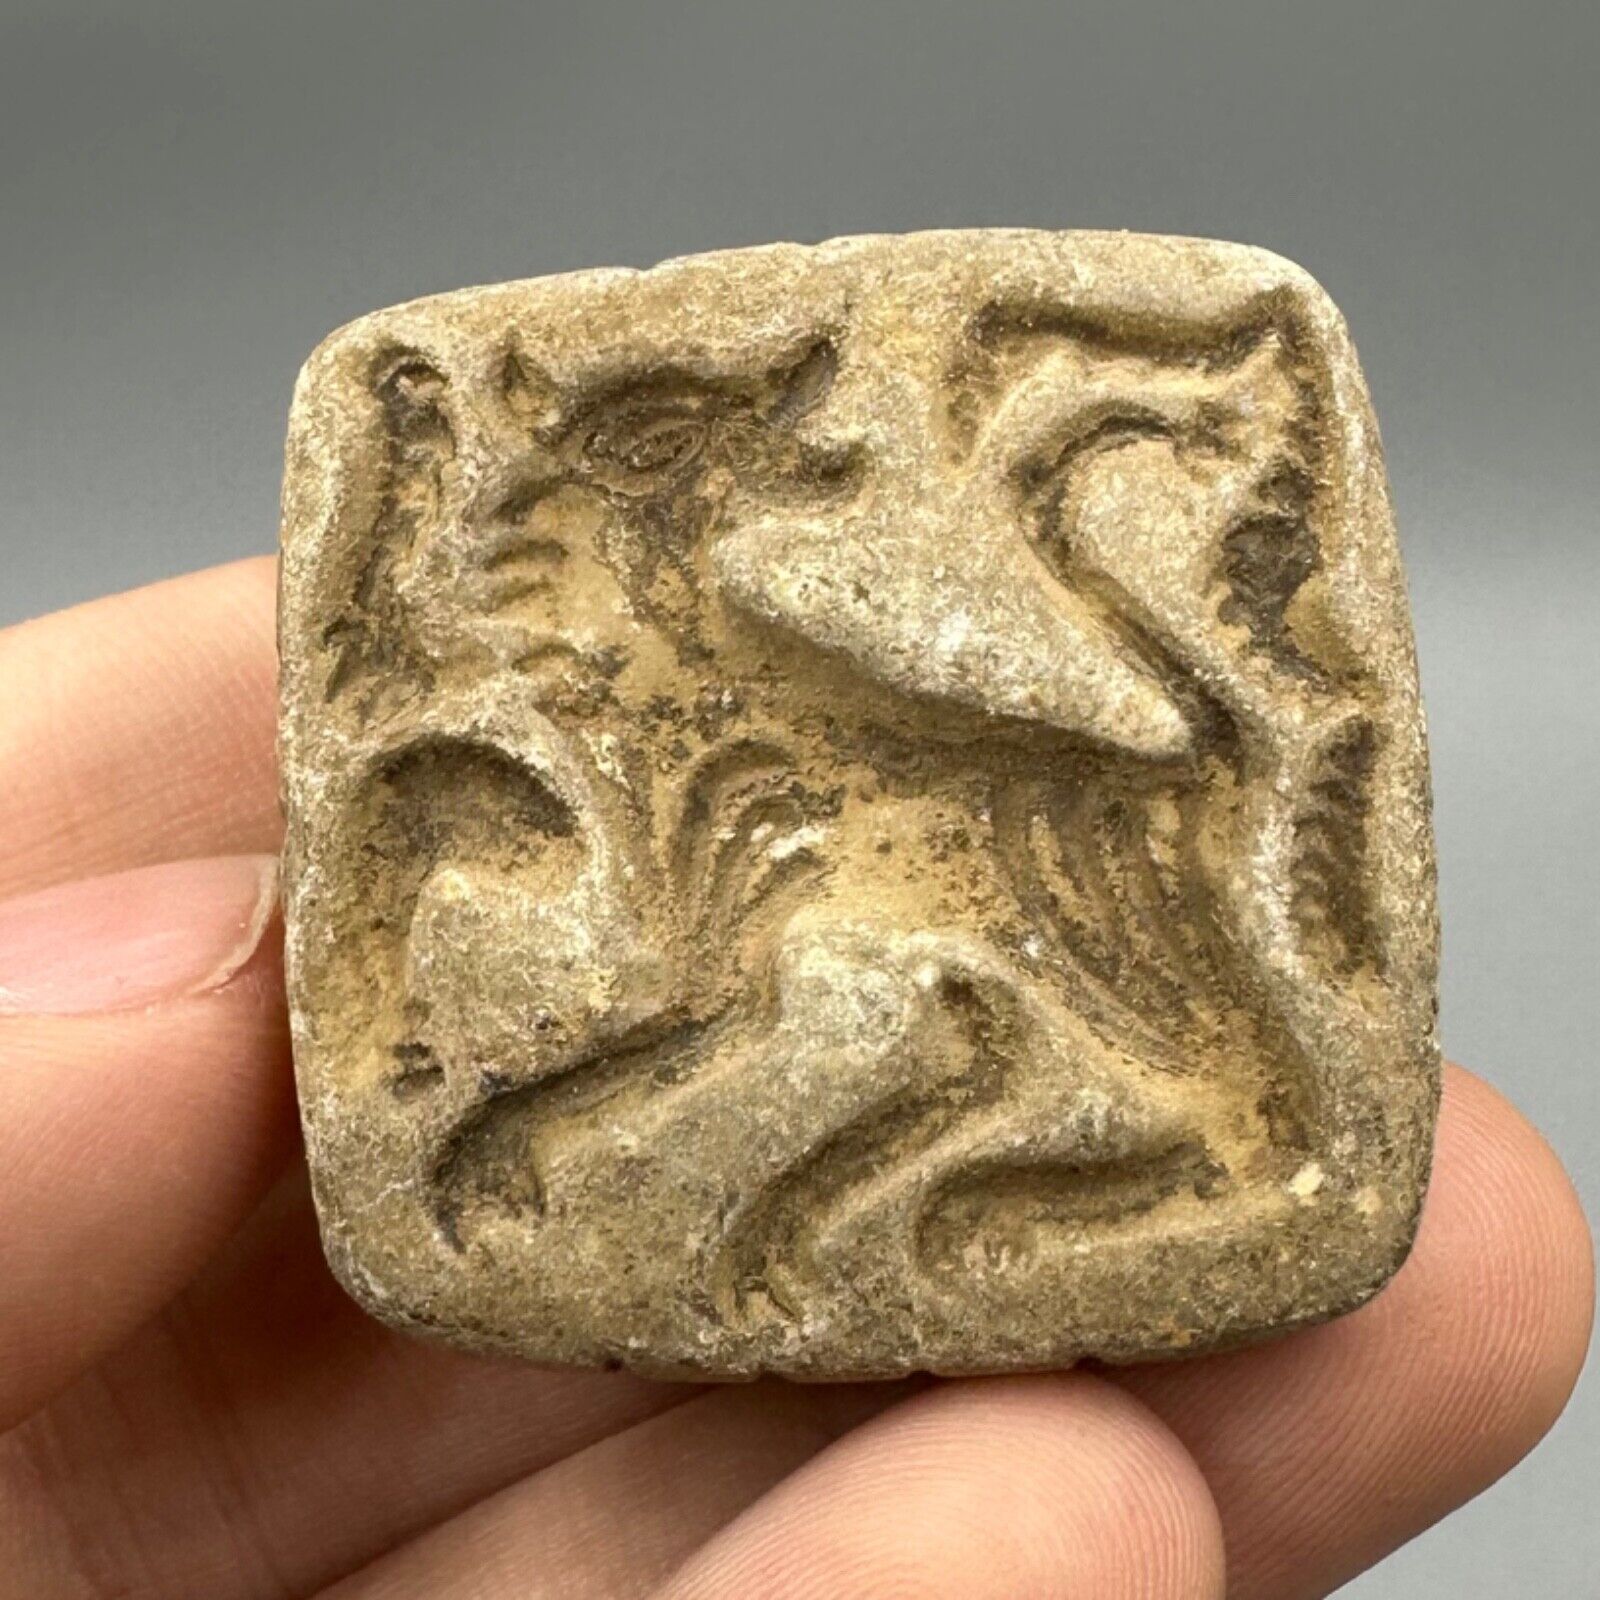 A Genuine Rare Ancient Near Eastern Stamp With Animal Intaglio